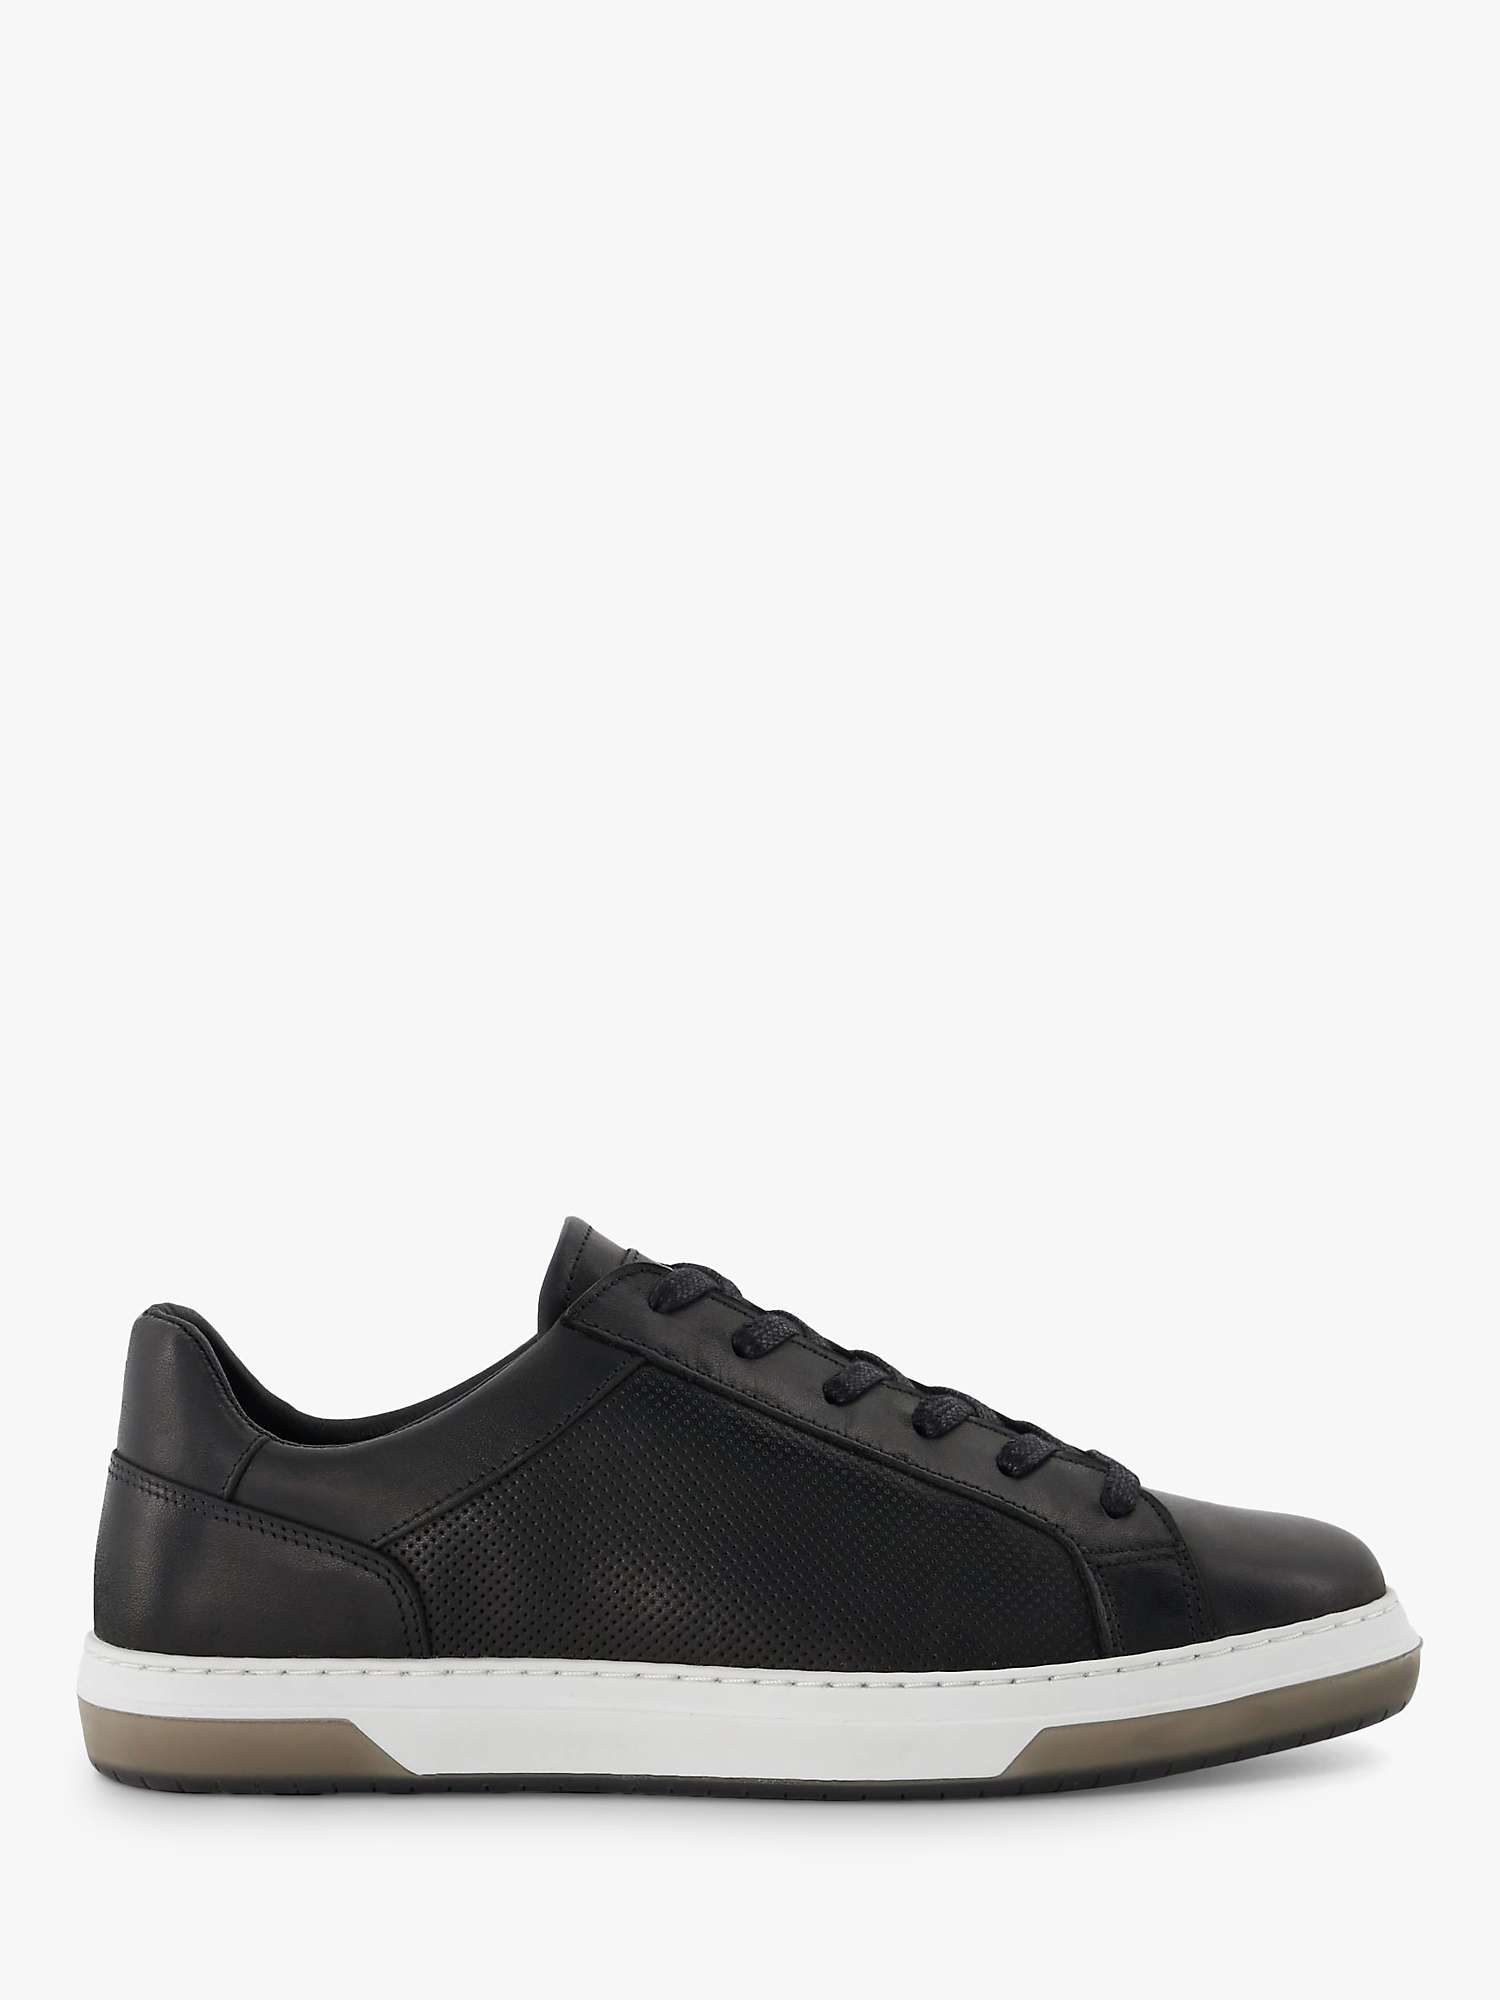 Buy Dune Tie Leather Black Trainers Online at johnlewis.com